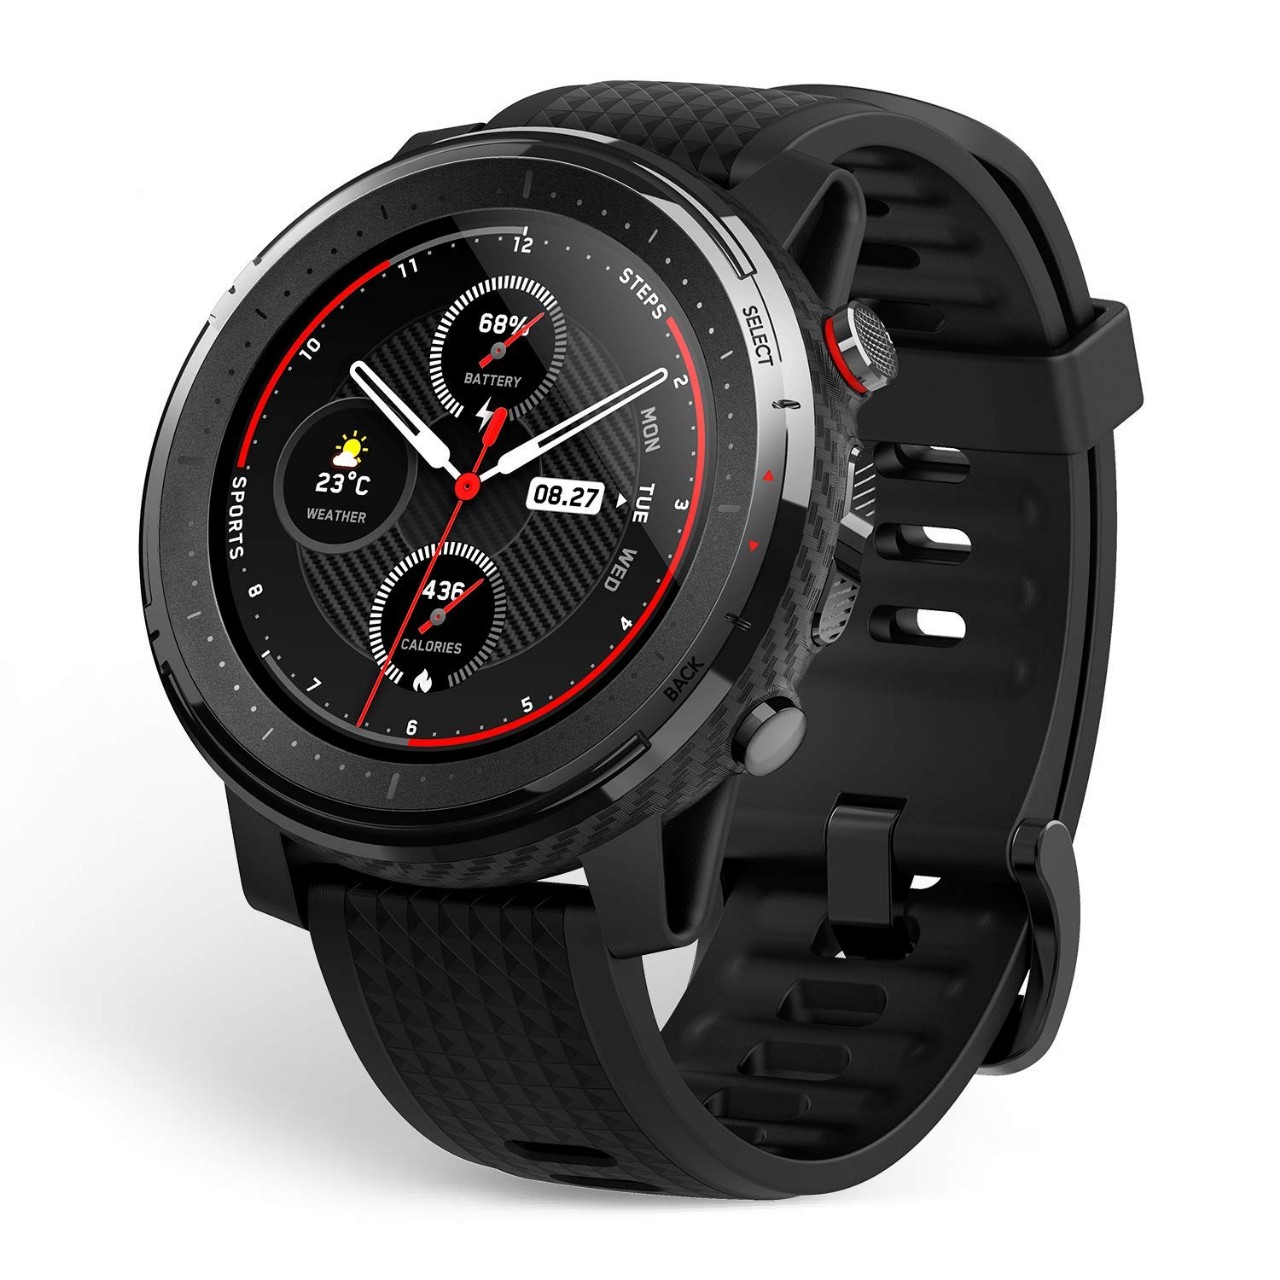 To adjust the time and date on your Amazfit Stratos 3 fitness tracker